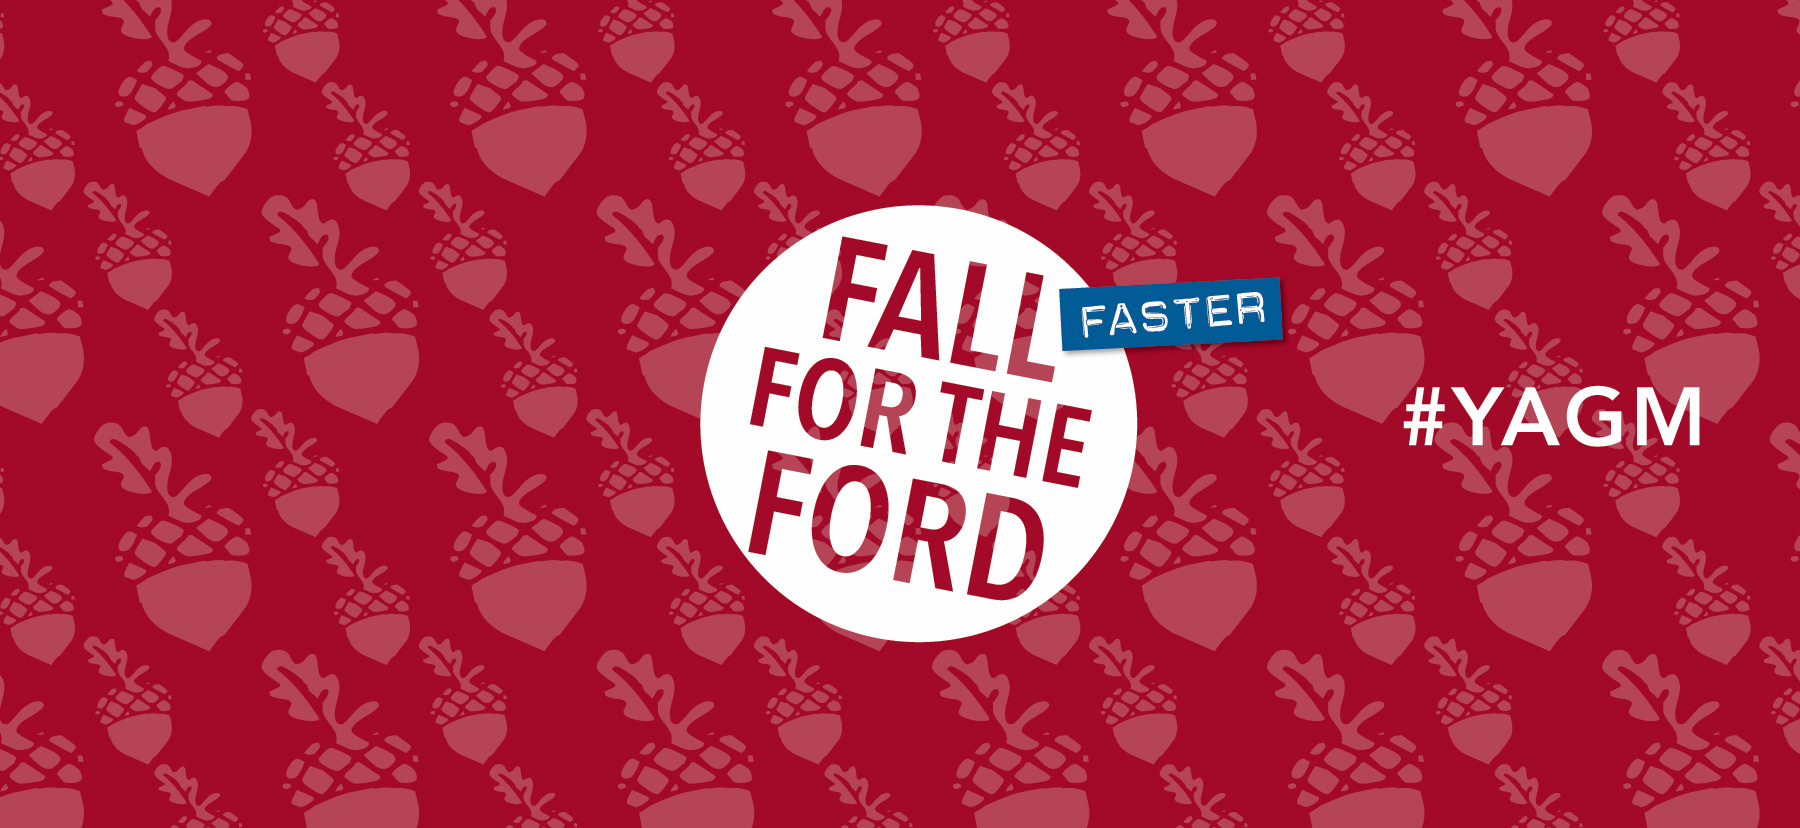 Fall for the Ford graphic